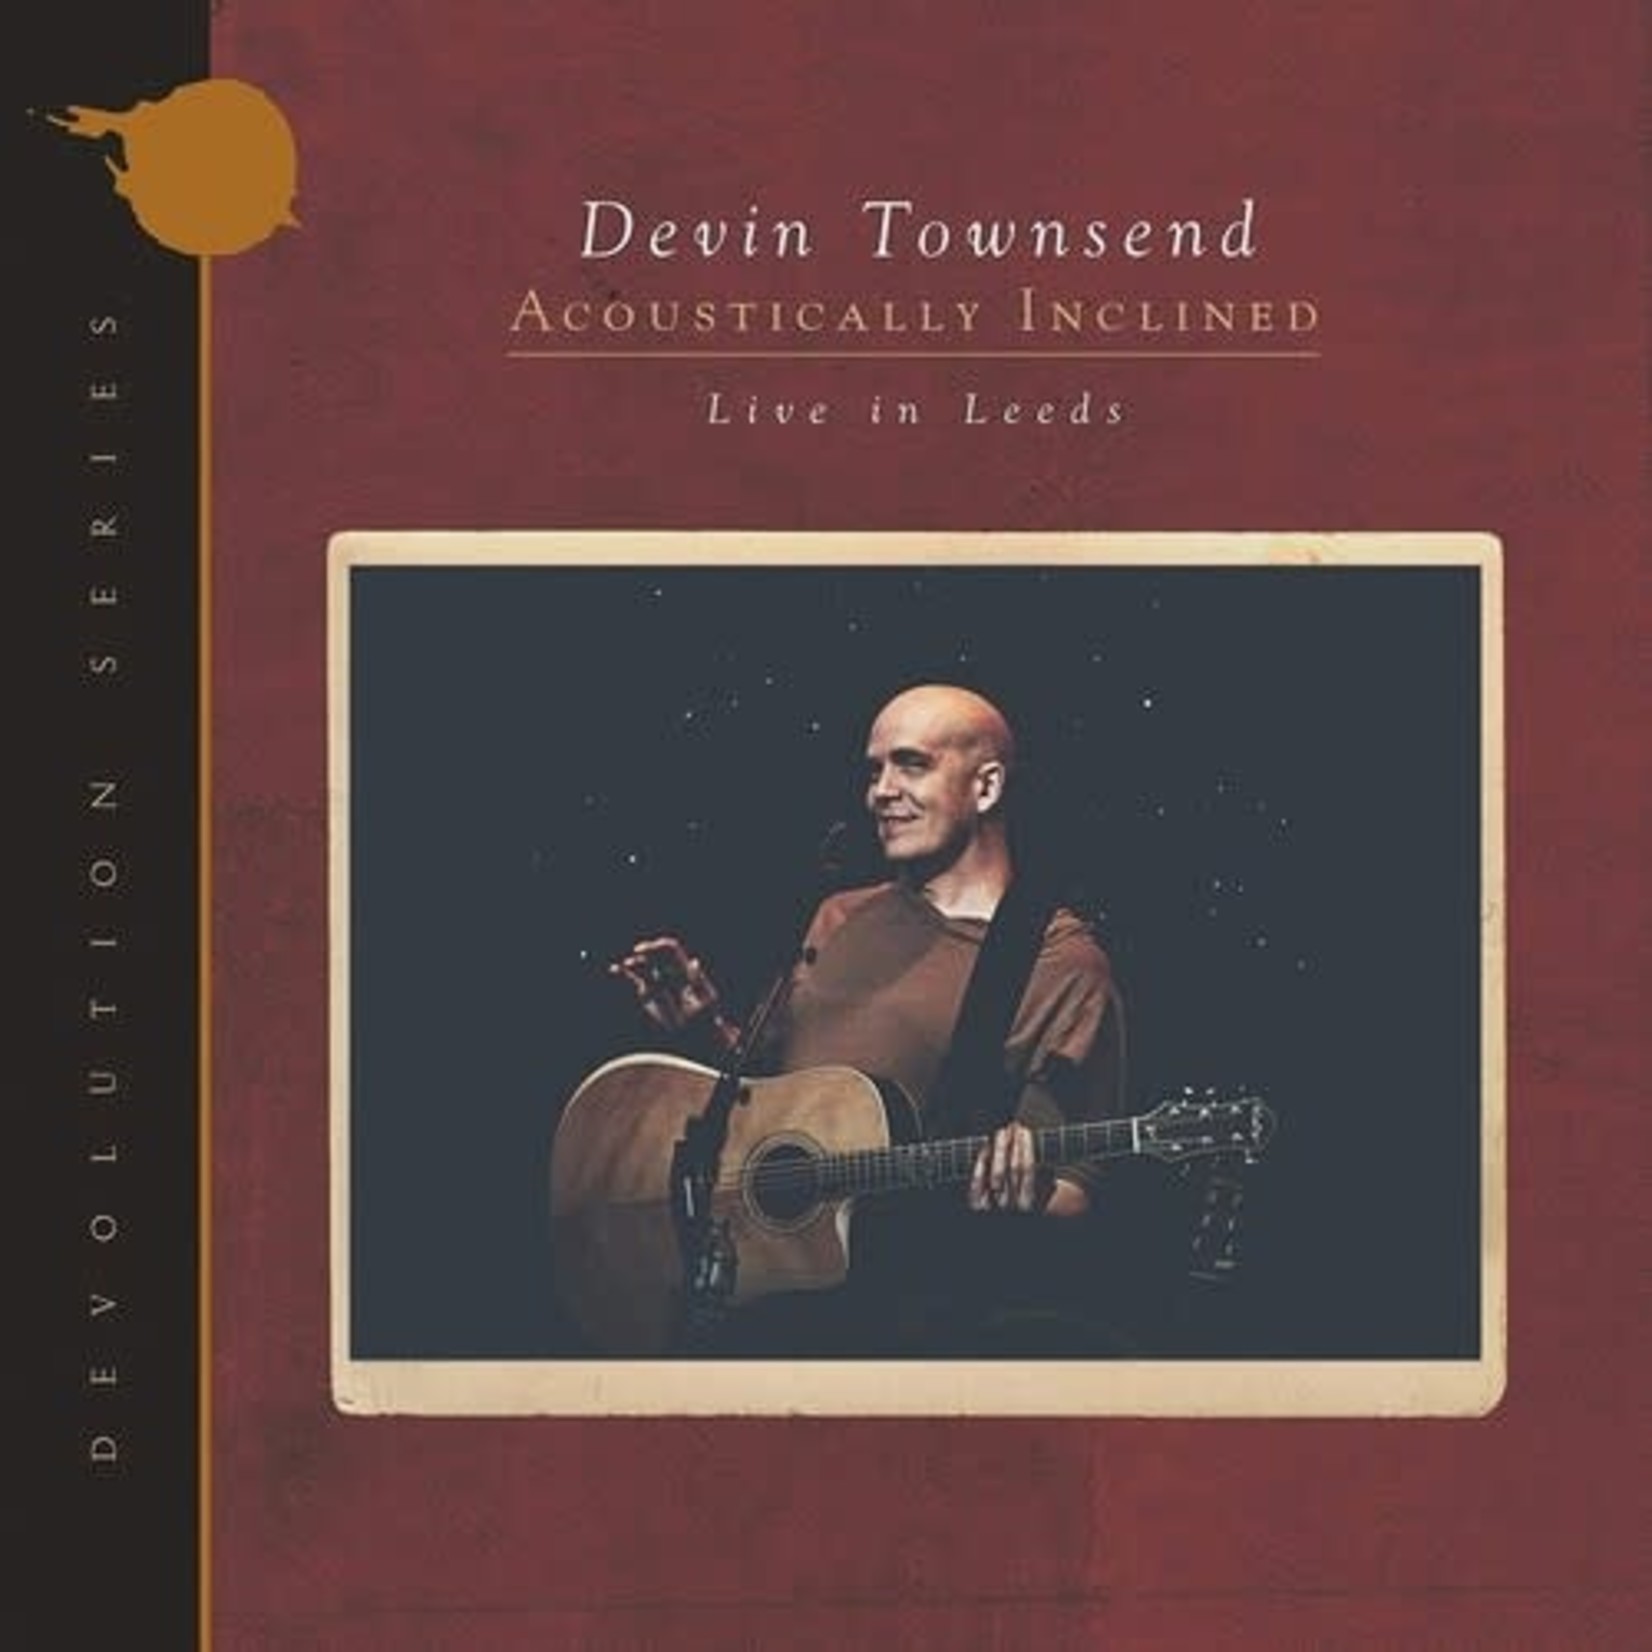 Devin Townsend - Acoustically Inclined: Live In Leeds (Devolution Series #1) [CD]